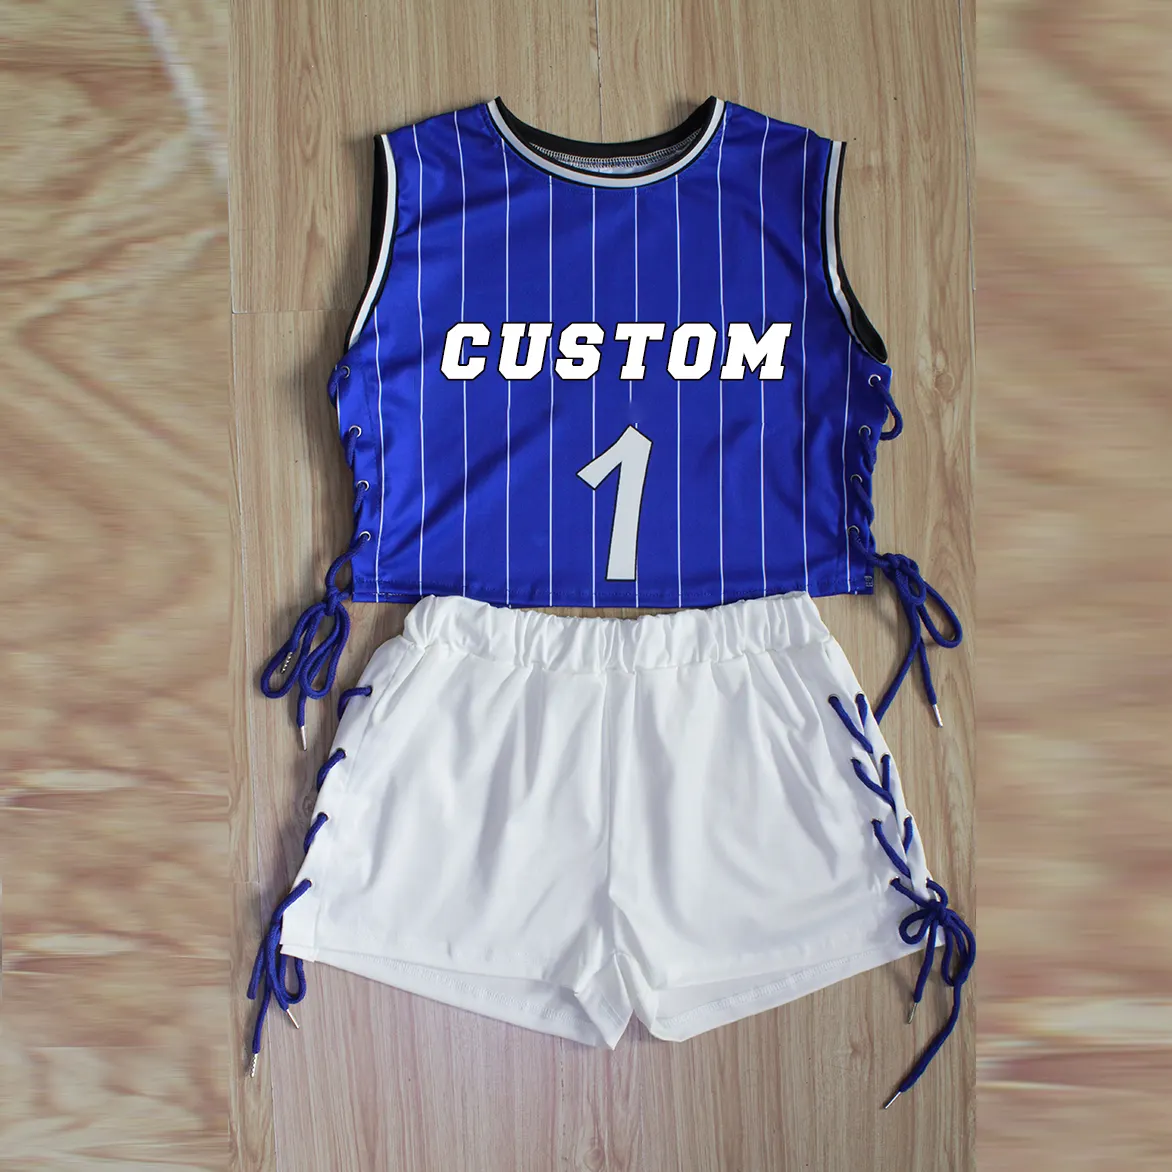 Custom Track Suits Two Piece Sets Shorts Clothing 2 Pieces Jersey Tennis Skirt Plus Size Summer Clothes Short for Woman Printed